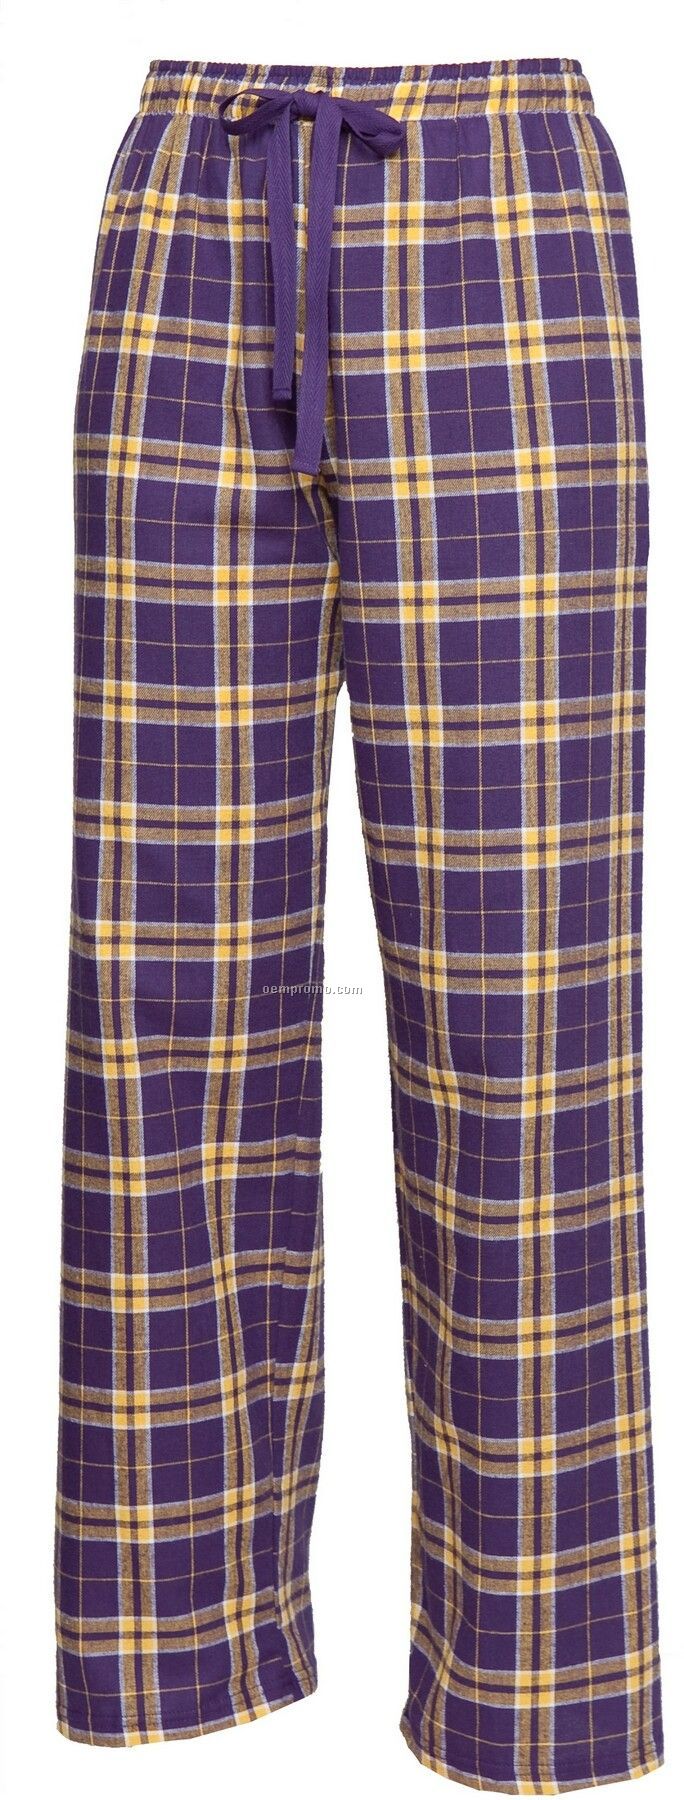 Youth Team Pride Flannel Pant In Purple & Gold Plaid